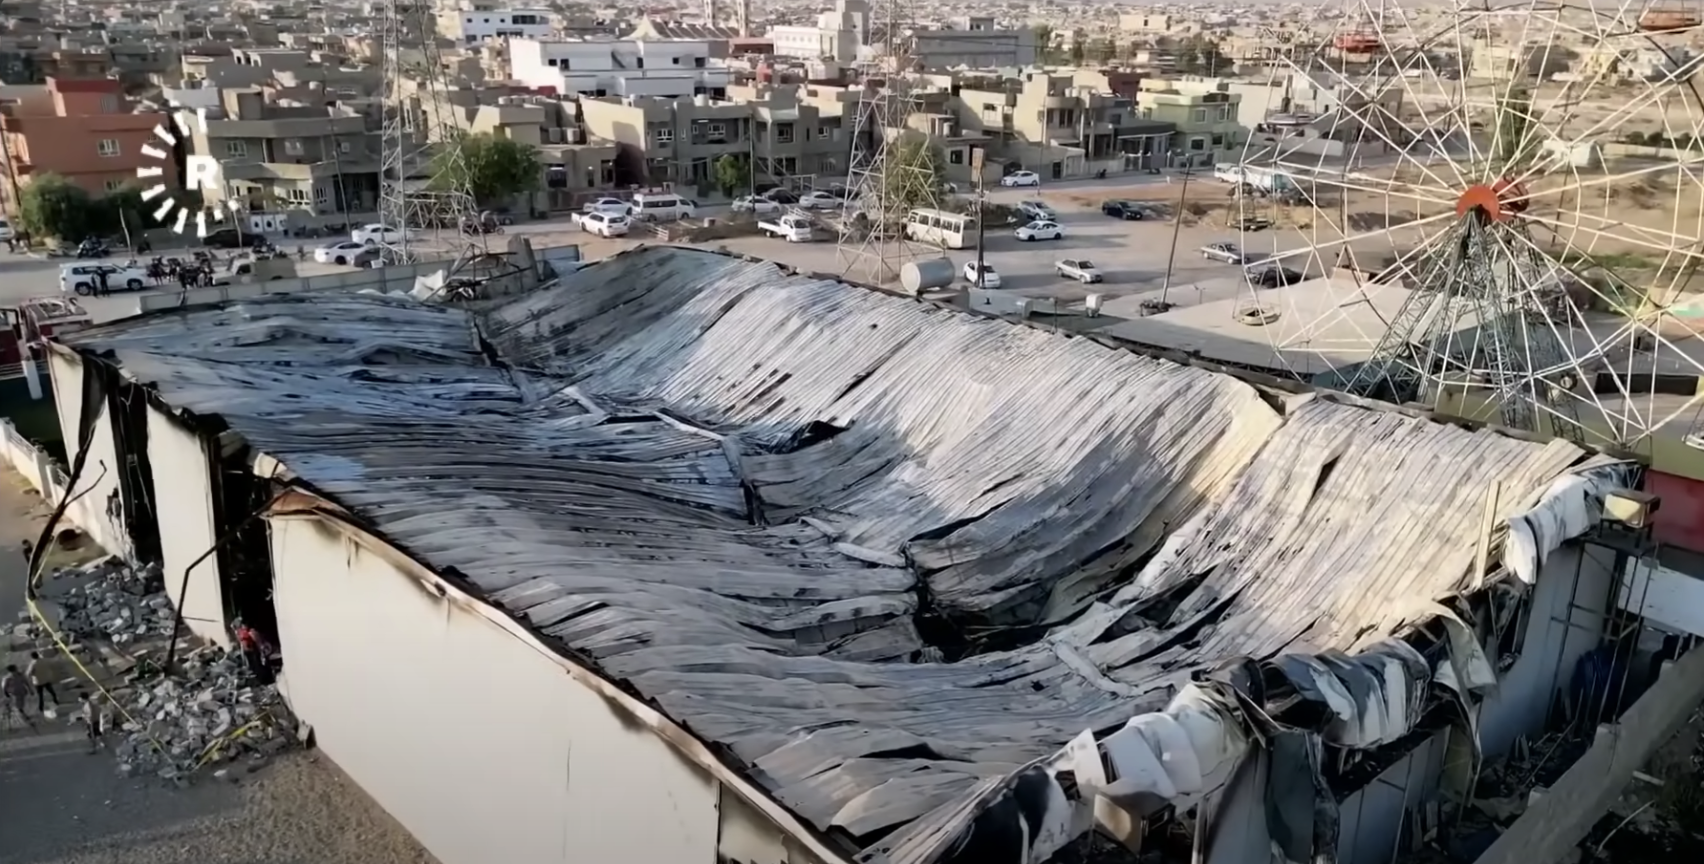 The caved-in roof of Haneen and Revan Isho's wedding venue | Source: youtube.com/@SkyNews